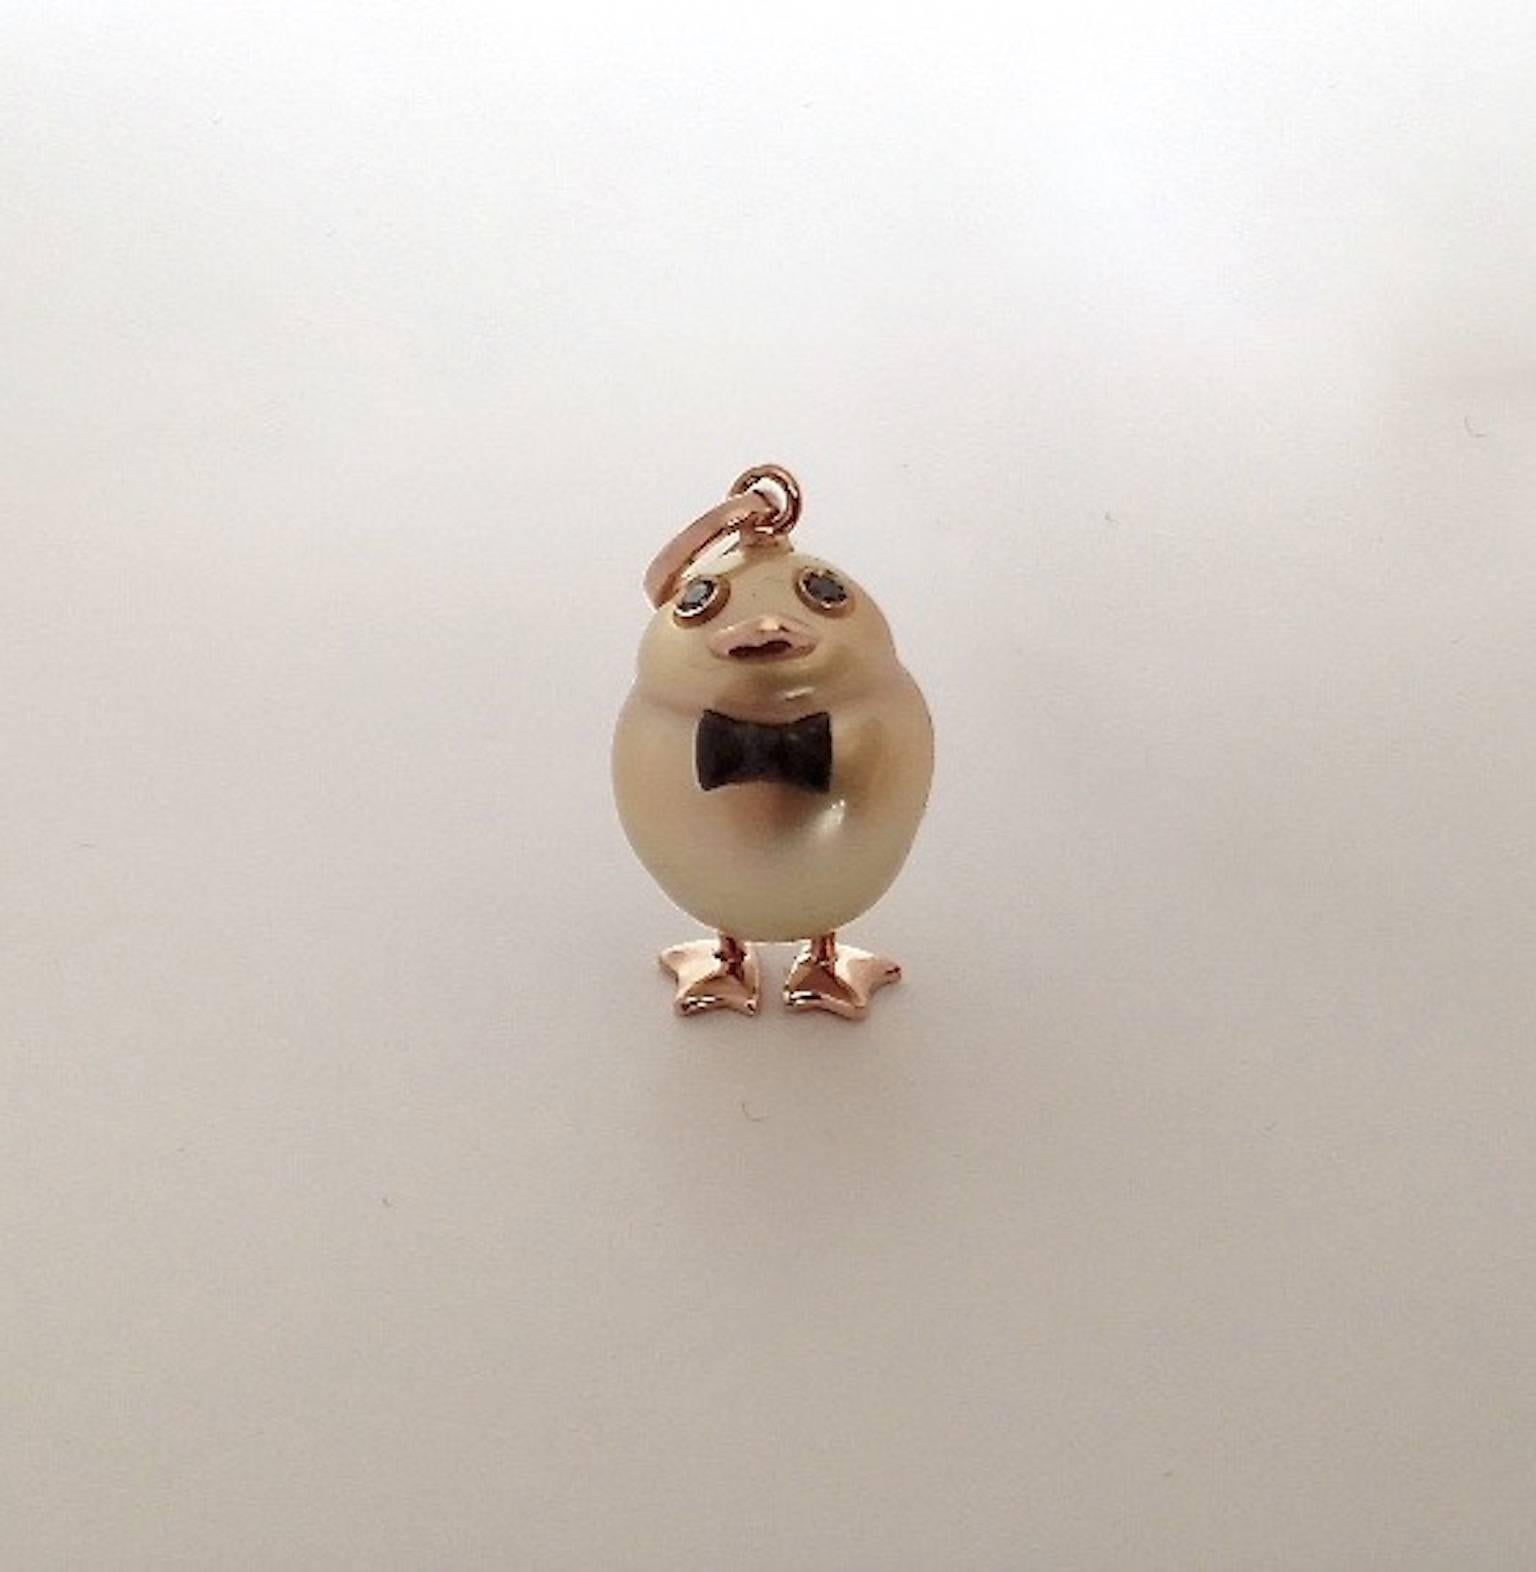 A duckling made with a gold Australian pearl and two black diamonds in its eyes.
Ring, beak and legs made in pink gold.
The bow tie is in white gold plated in black rhodium.
This one as all my pearl pendants is really handmade and is a unique piece.